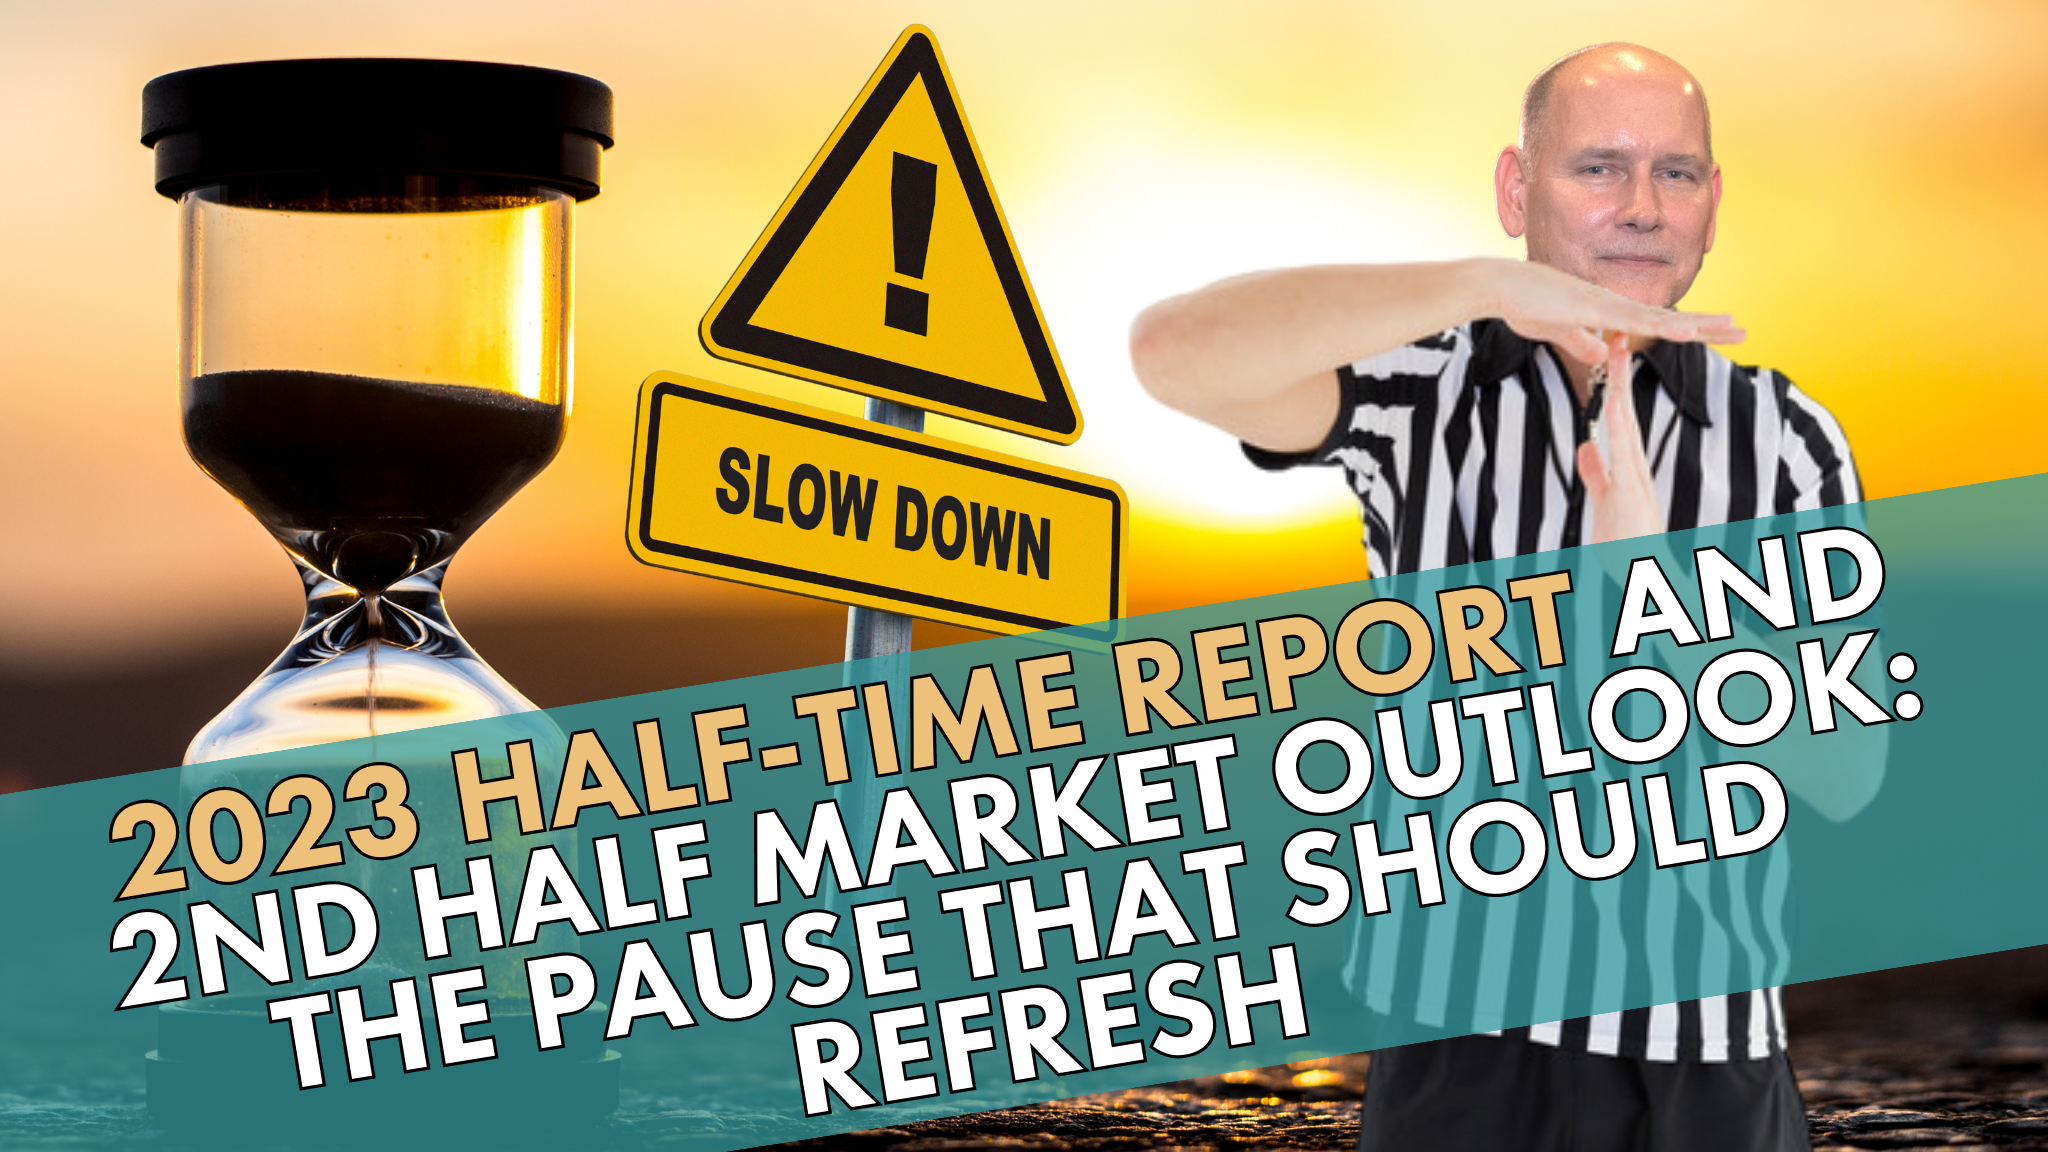 2023 Half-Time Report and 2nd Half Market Outlook: The Pause That Should Refresh